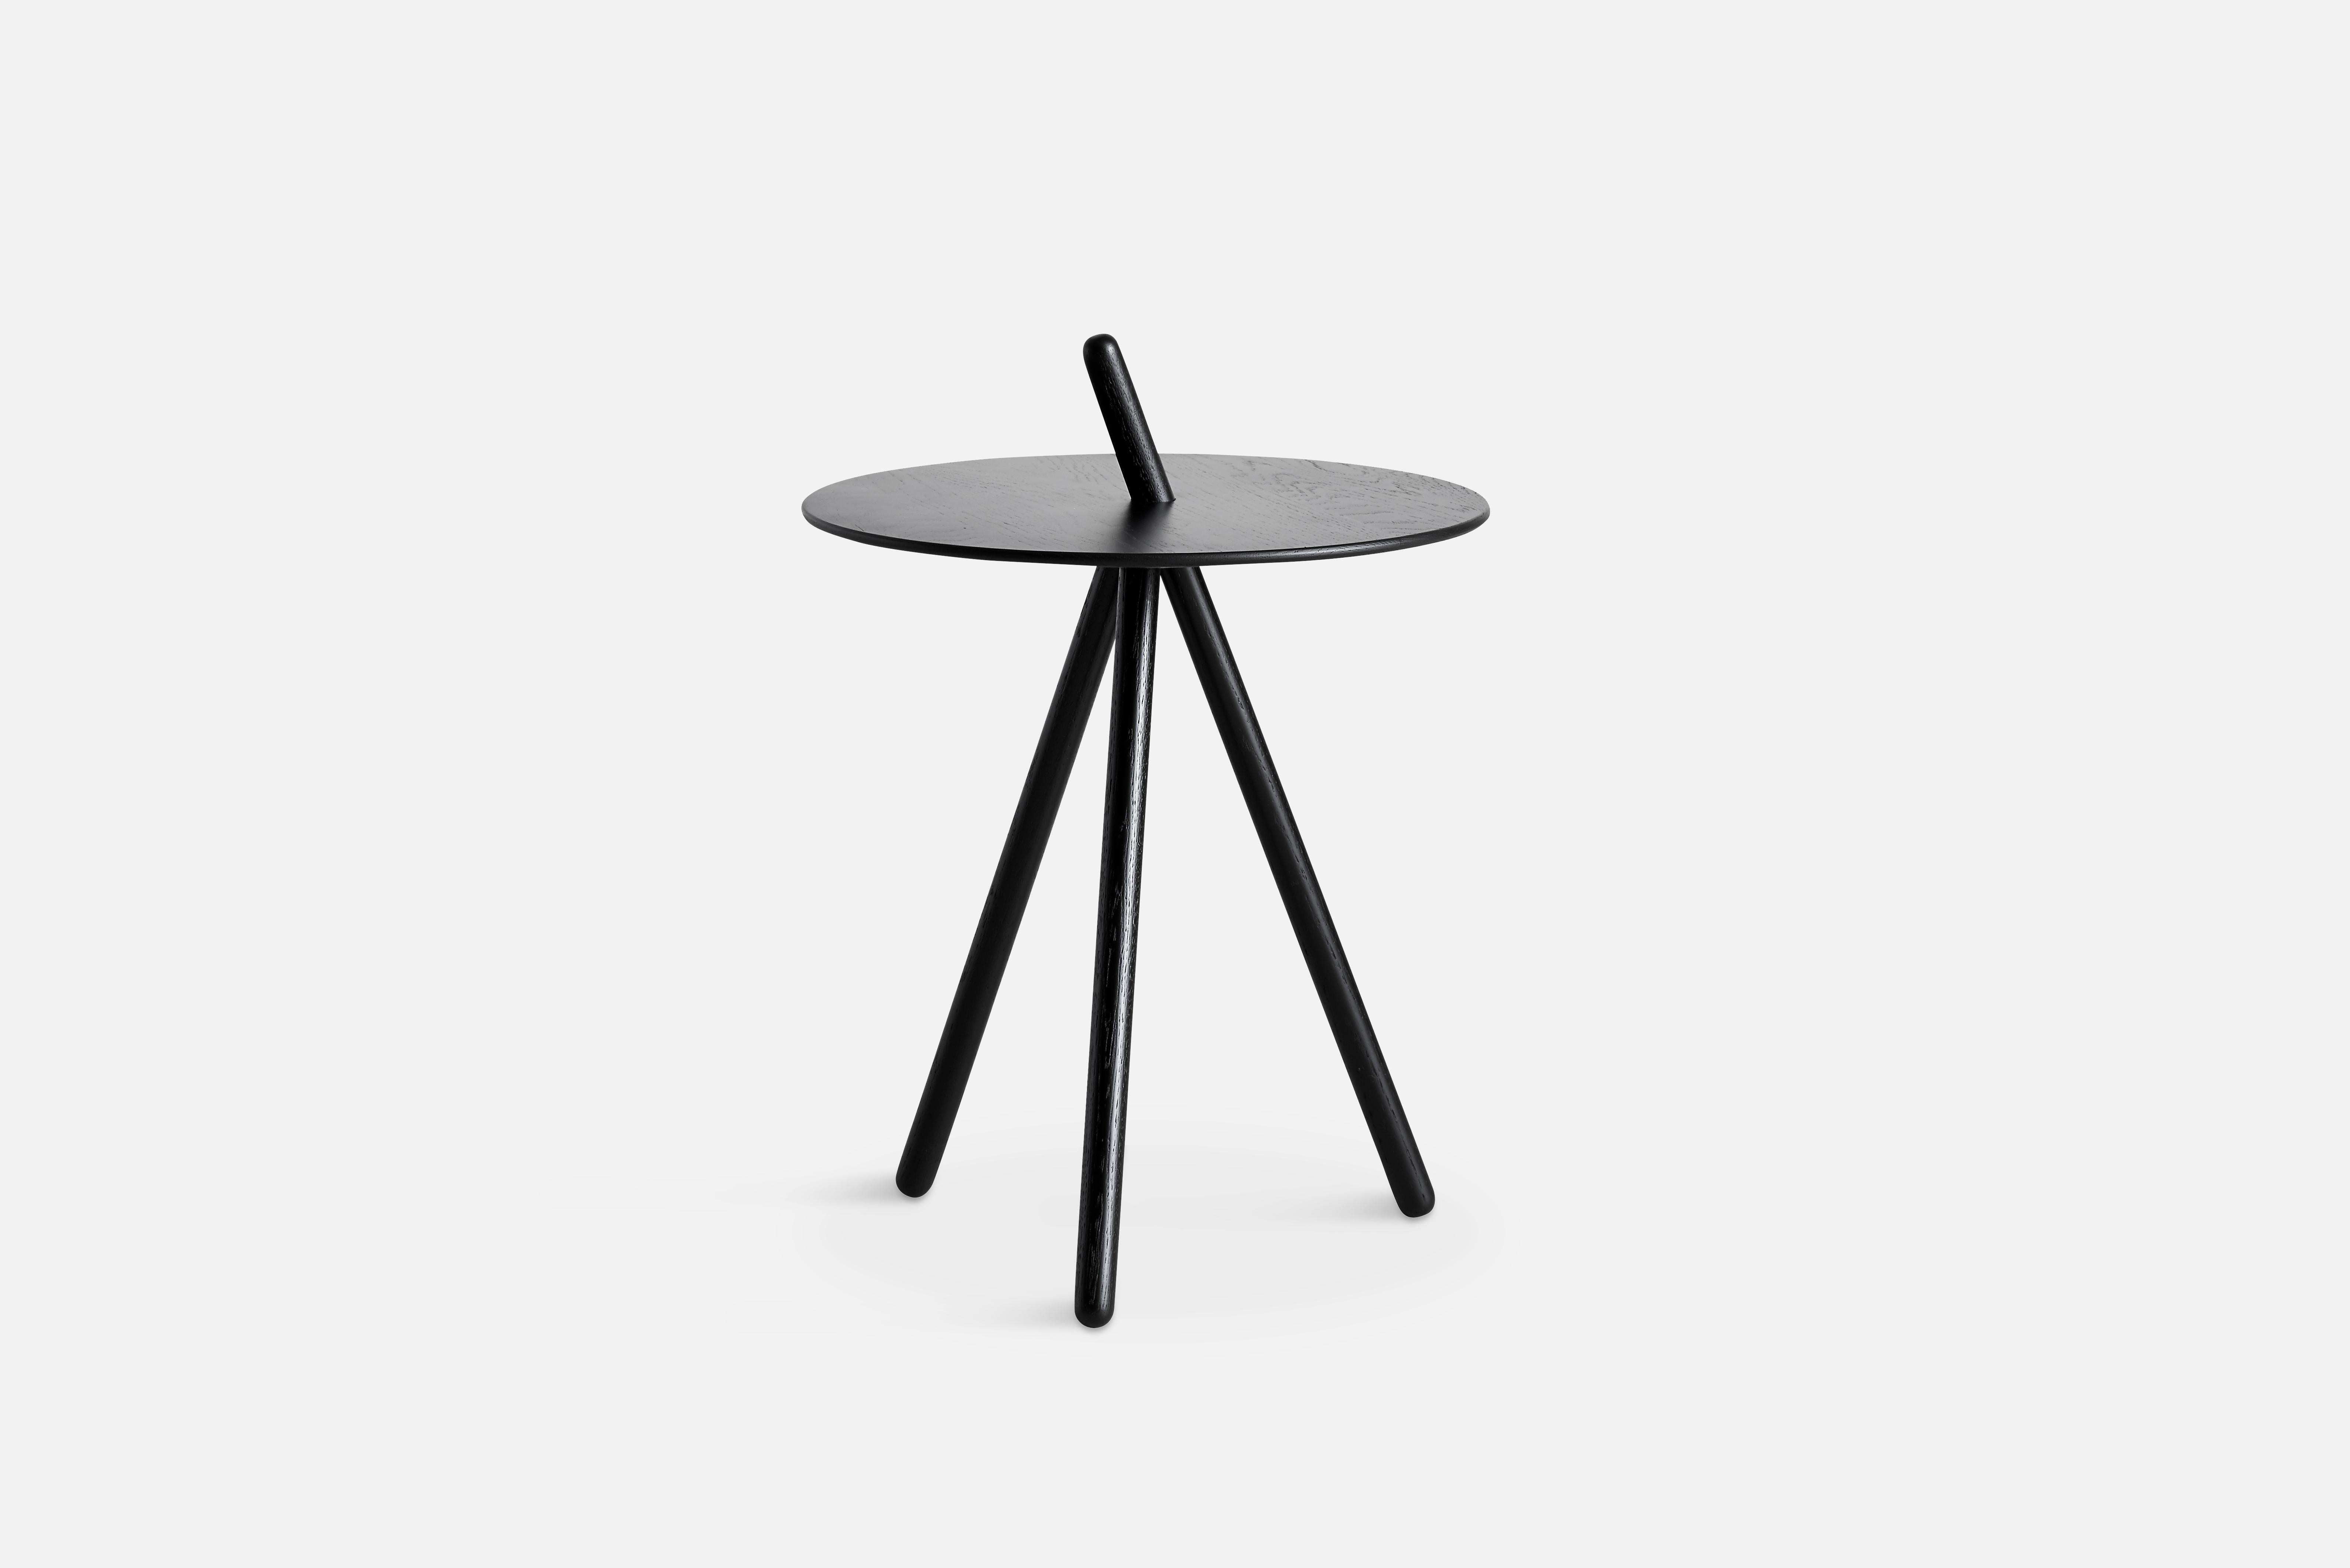 Black oak come here side table by Steffen Juul
Materials: Oak.
Dimensions: D 41 x W 41 x H 45 cm.

The founders, Mia and Torben Koed, decided to put their 30 years of experience into a new project. It was time for a change and a new challenge.